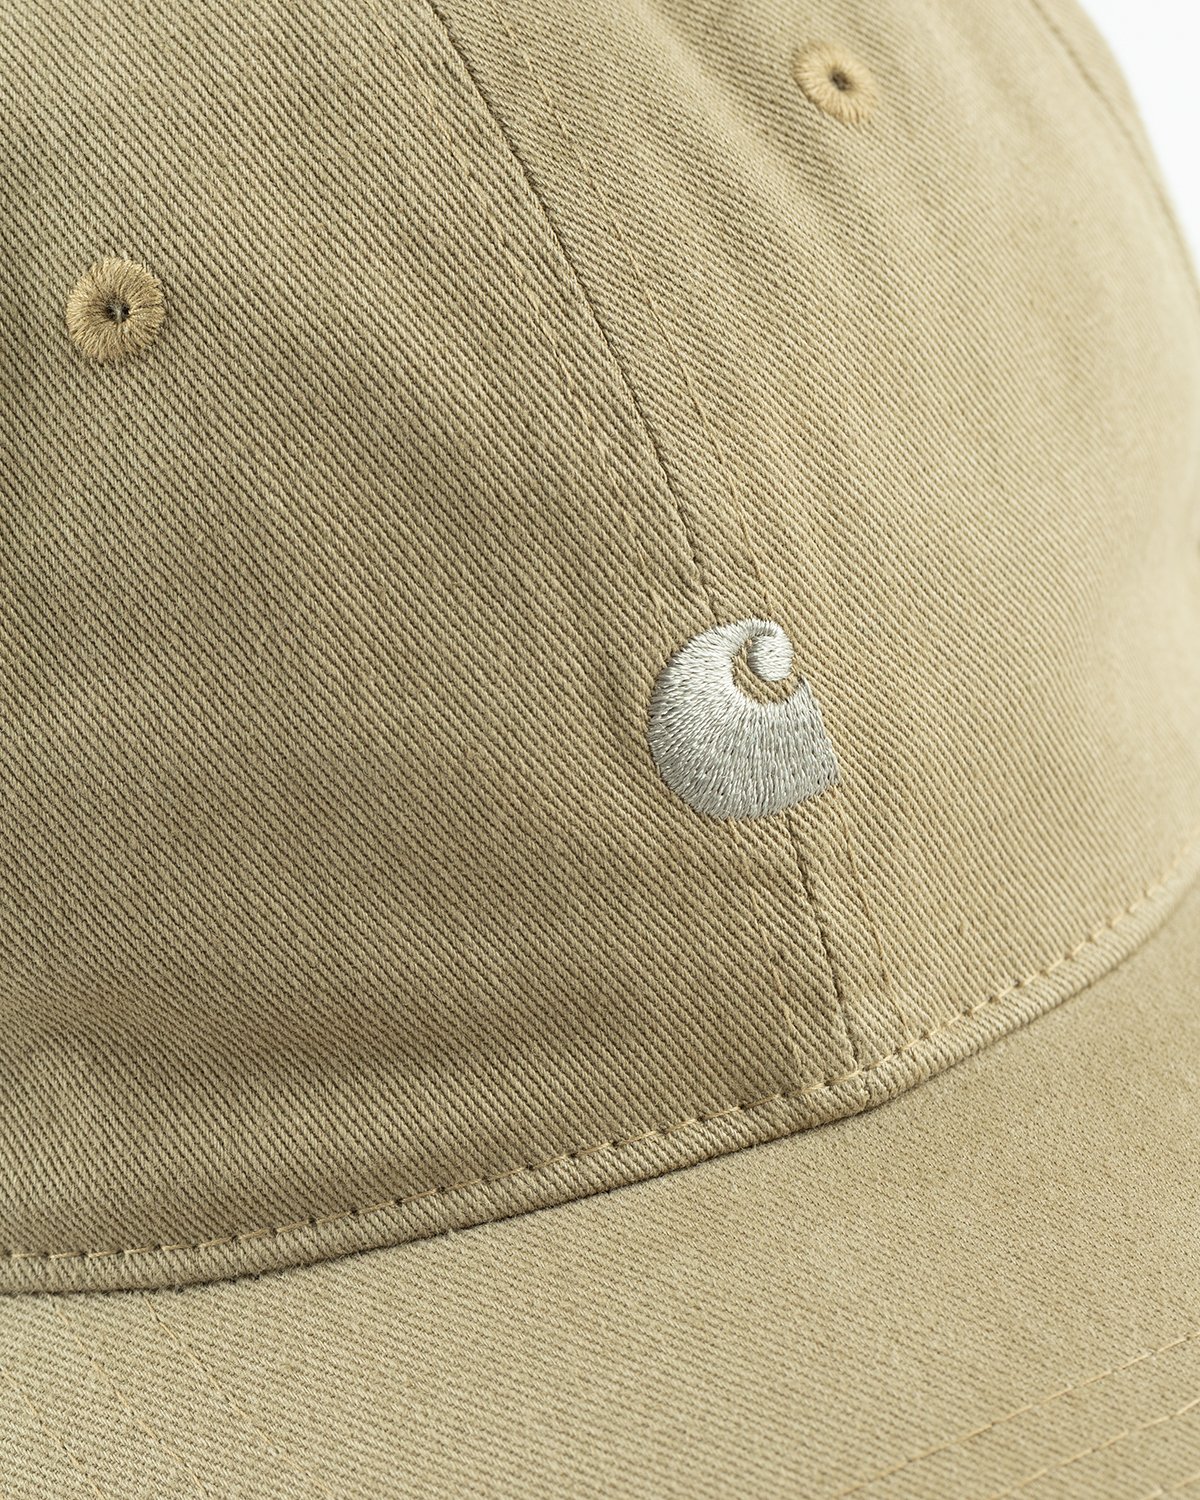 Carhartt WIP - Madison Logo Cap Natural Wall - Accessories - Beige - Image 5